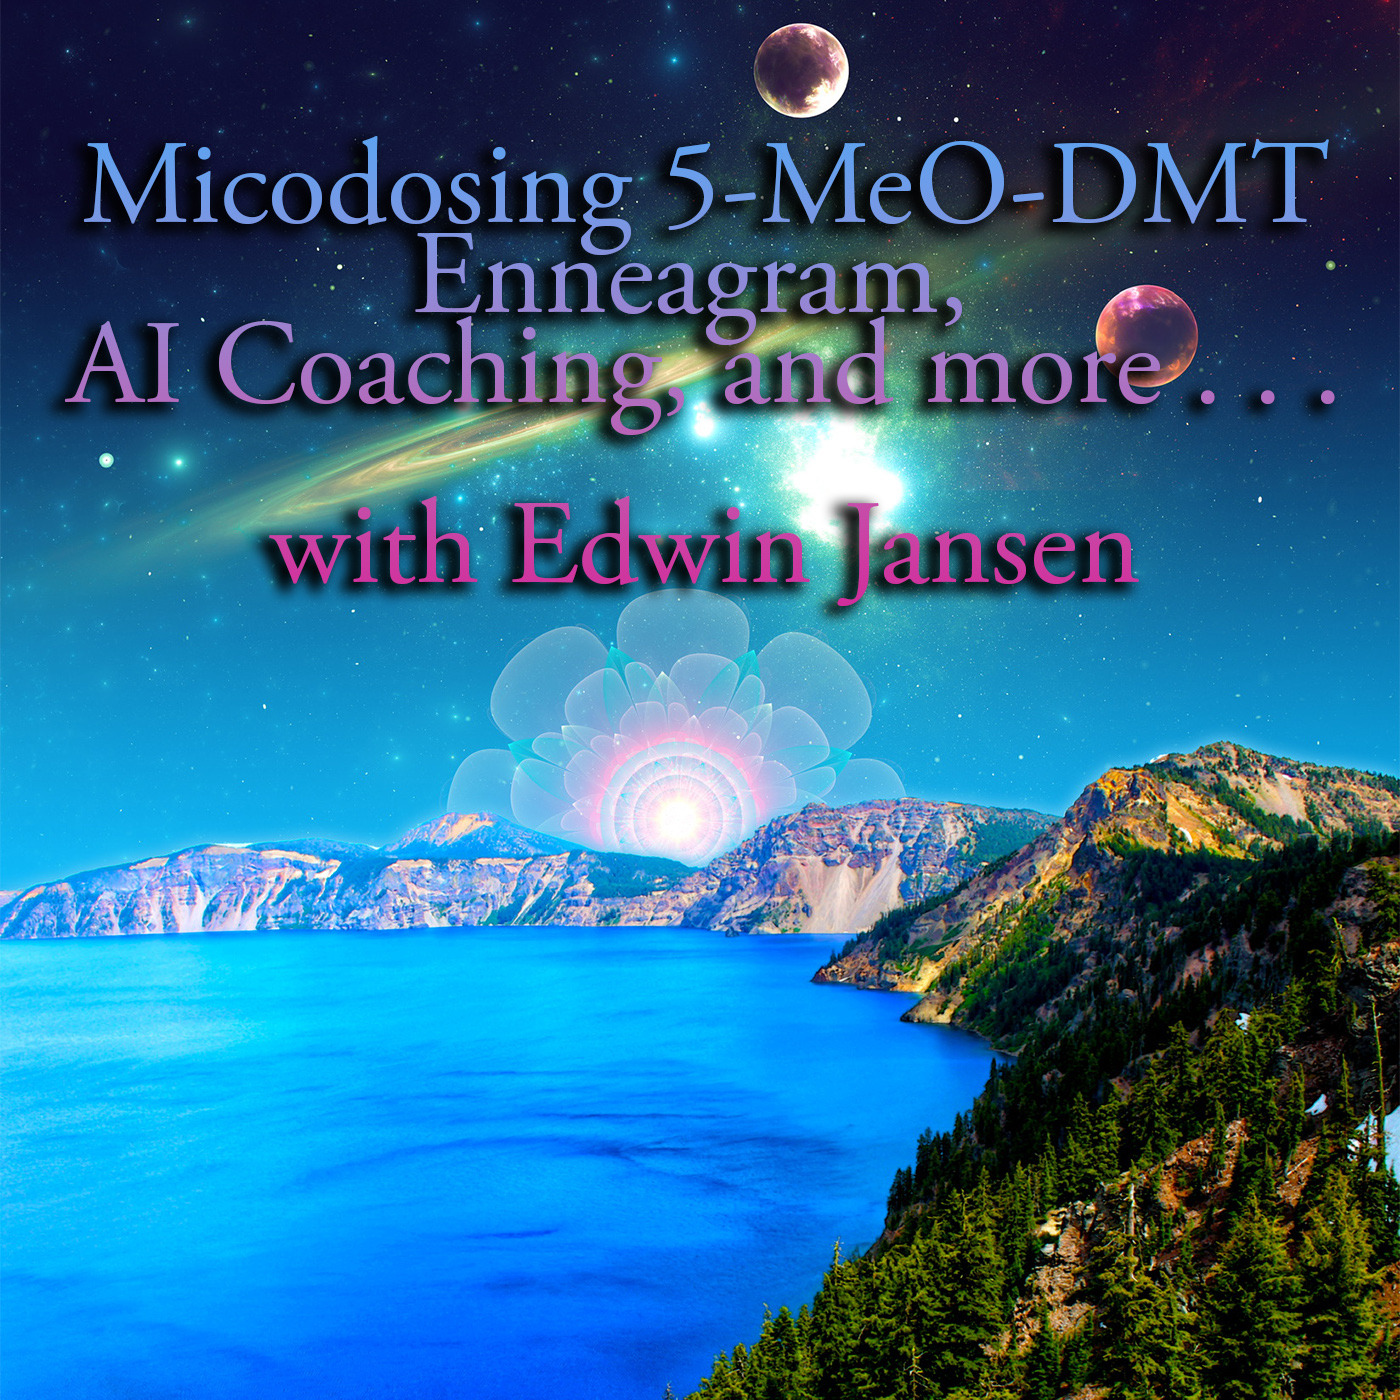 Episode 265: Microdosing 5-MeO-DMT, Enneagram, AI Coaching, and More with Edwin Jansen